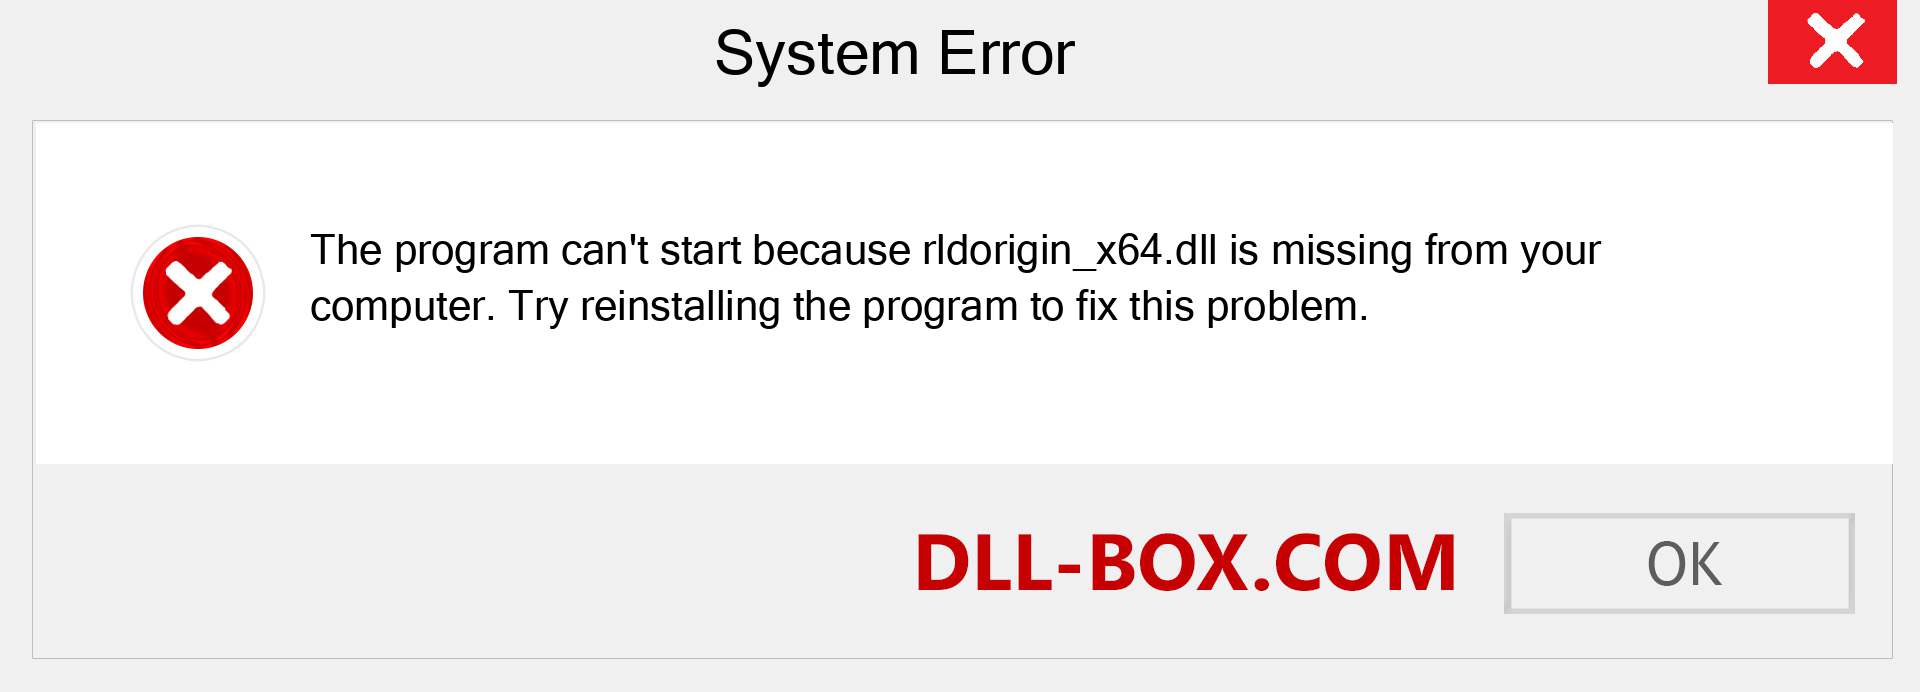  rldorigin_x64.dll file is missing?. Download for Windows 7, 8, 10 - Fix  rldorigin_x64 dll Missing Error on Windows, photos, images